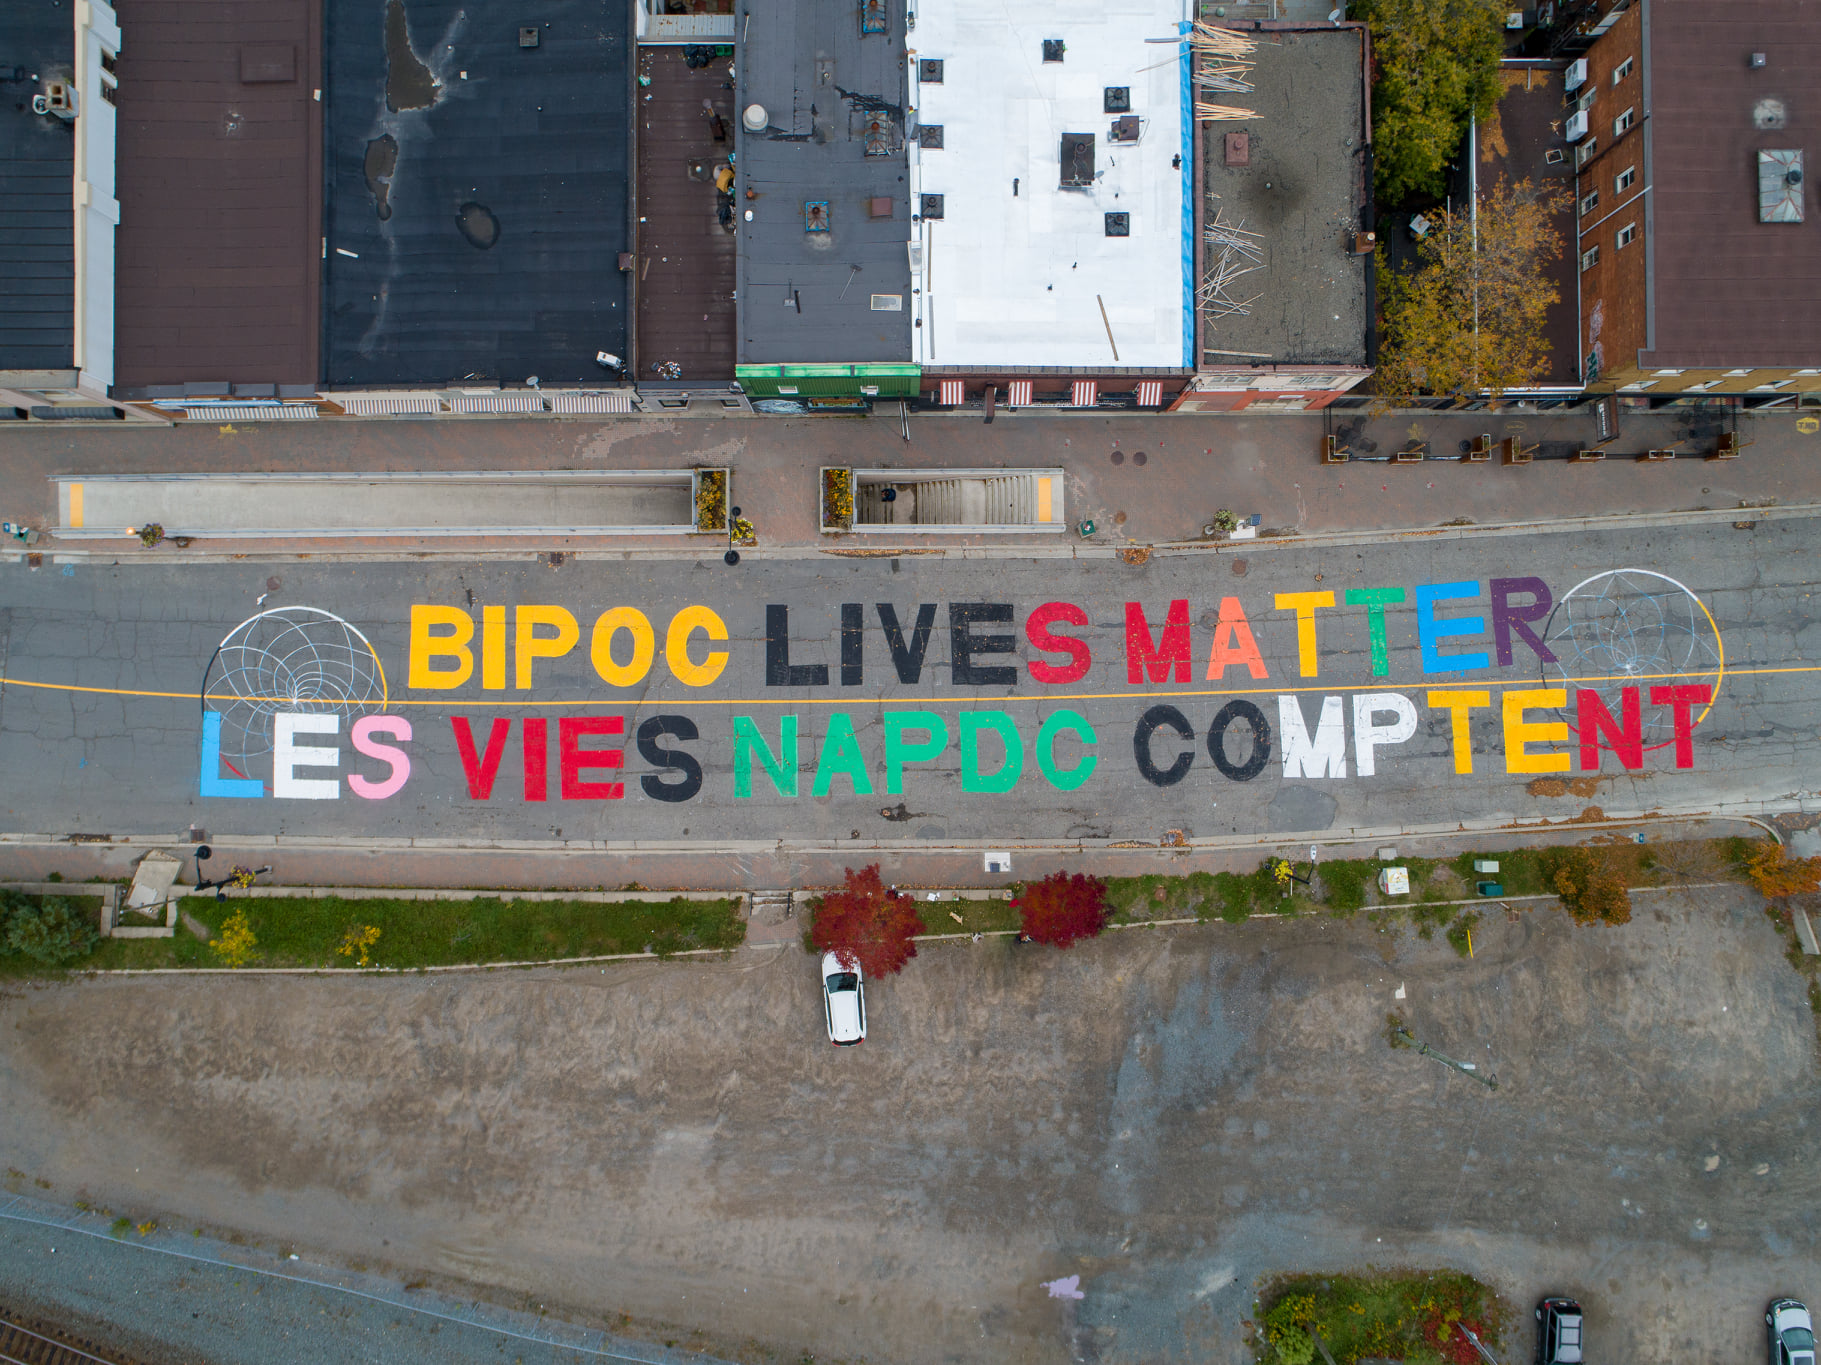 An aerial shot of a large ground mural spanning a road with colourful block letters "BIPOC LIVES MATTER" and underneath is the French version "LES VIES NAPDC COMPTENT"